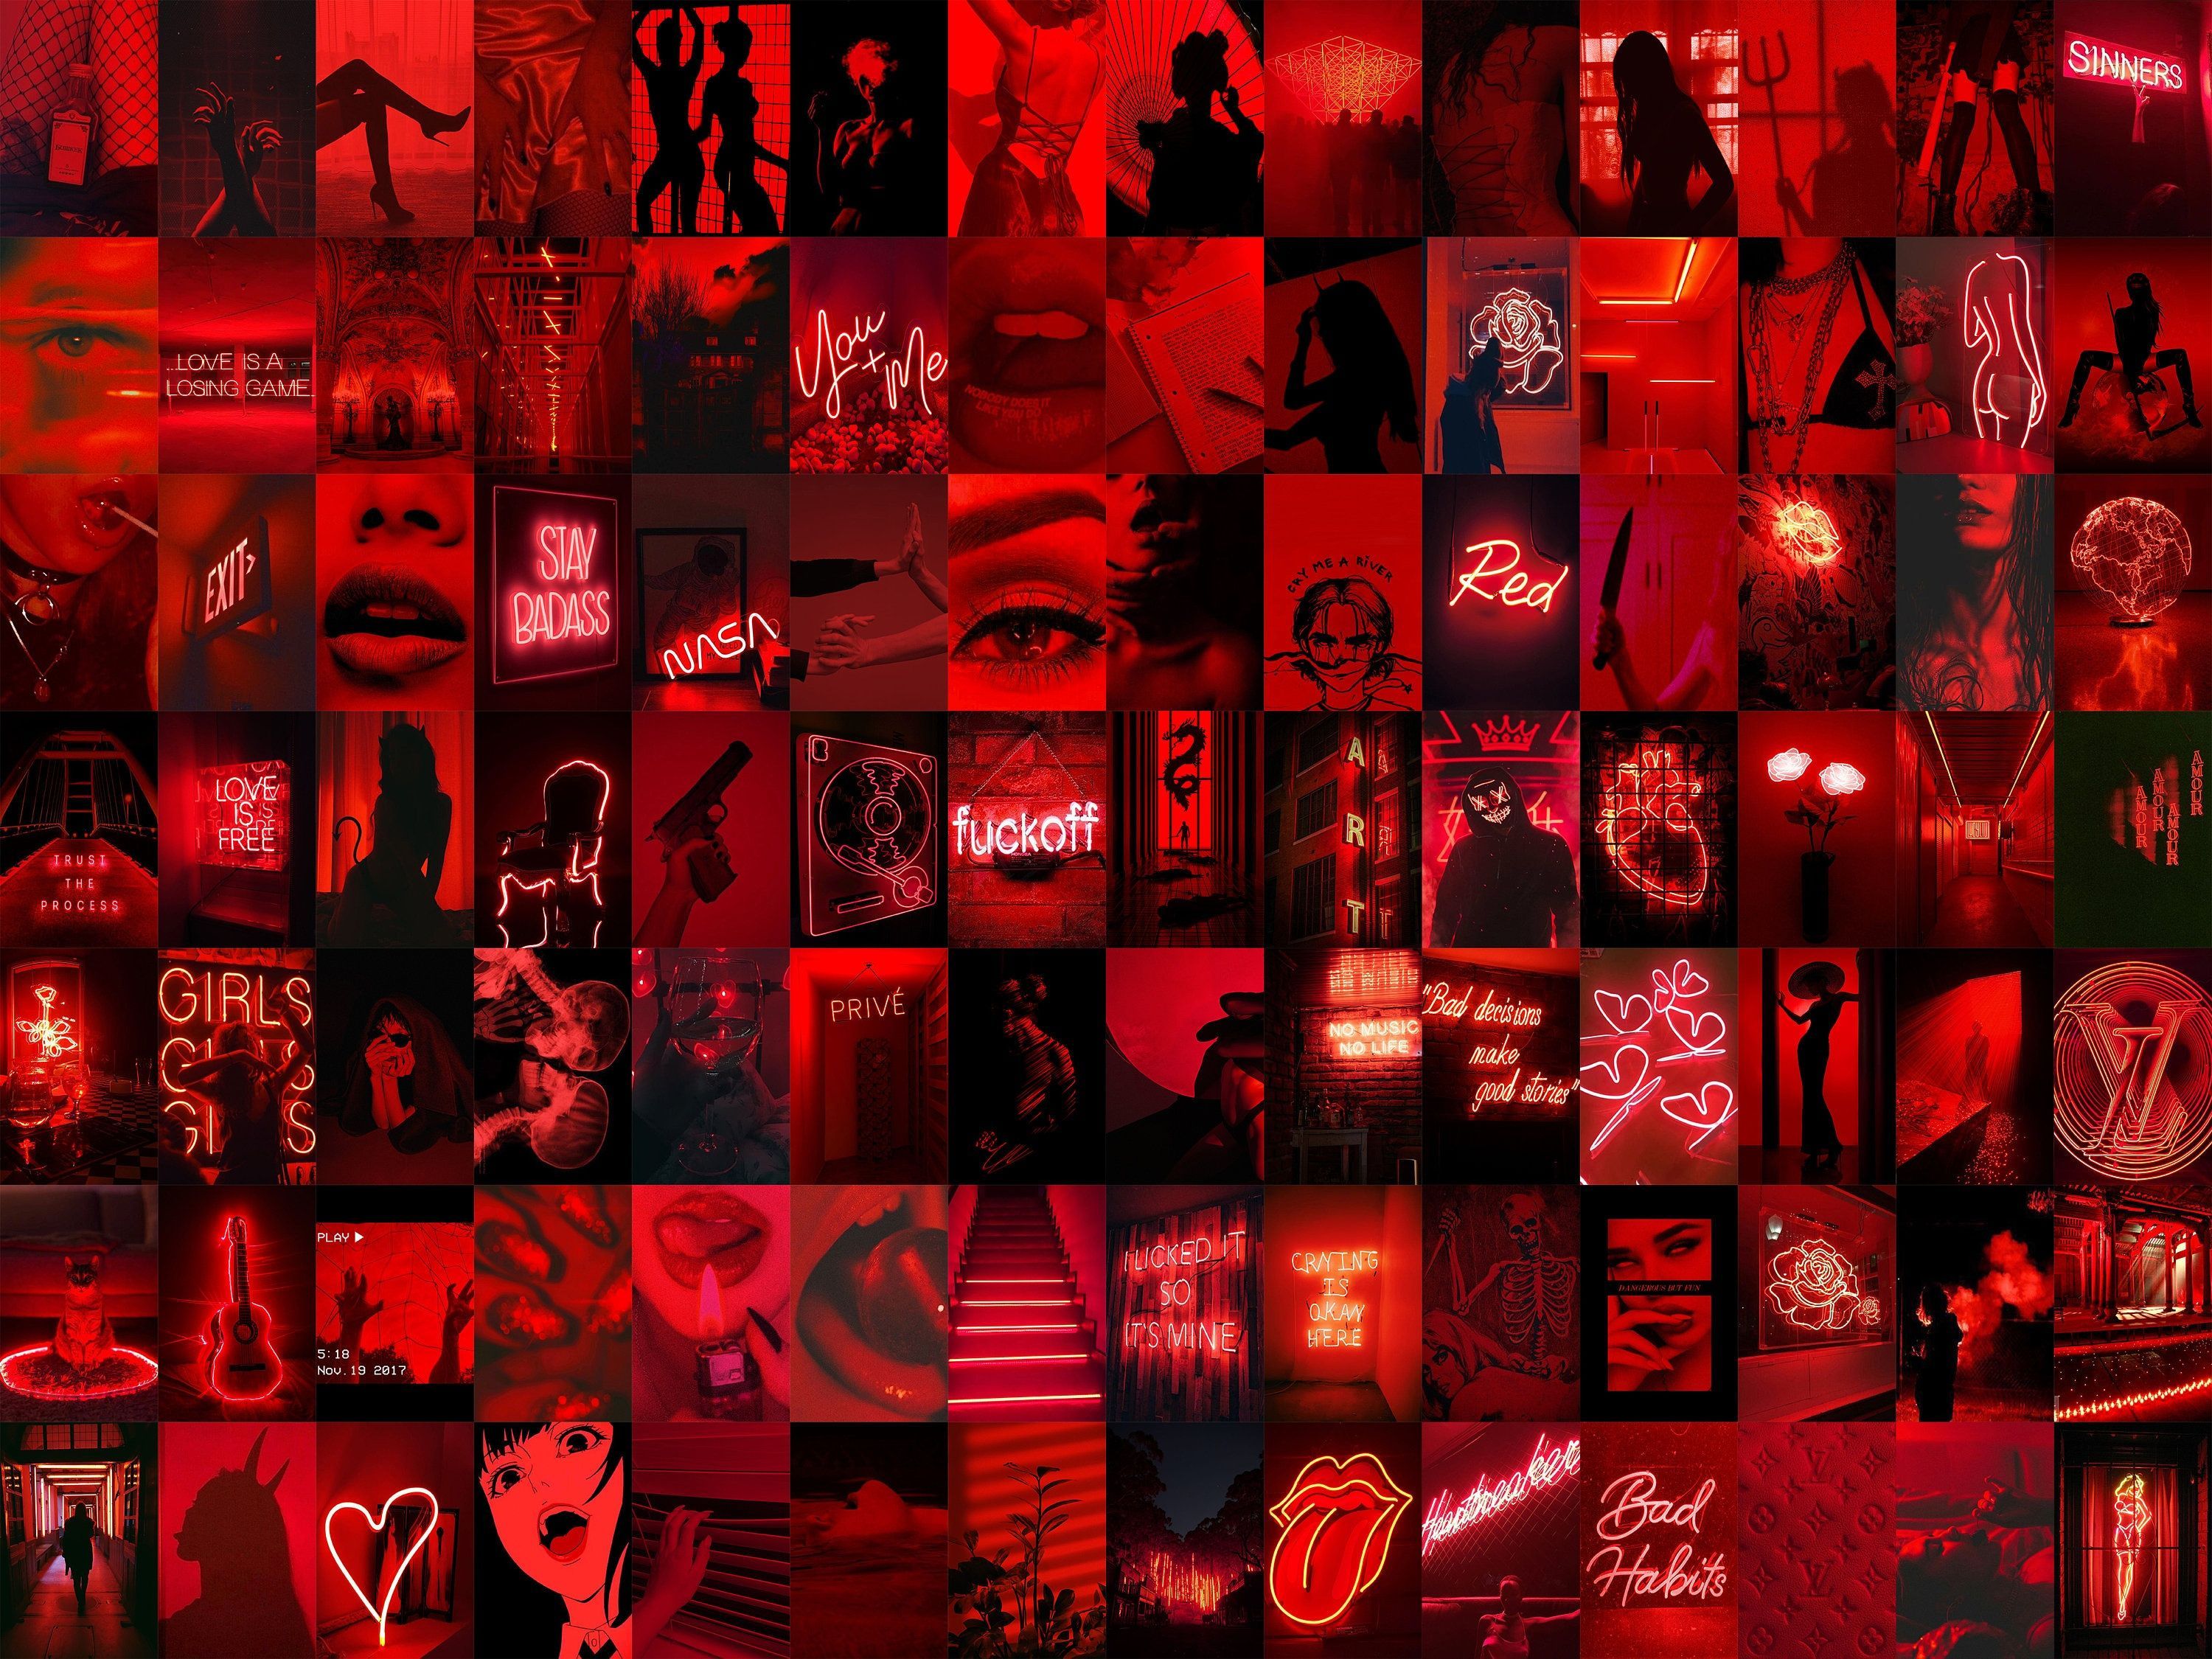 Aesthetic Red Collage Wallpapers for Desktop and Mobiles - Dark red, neon red